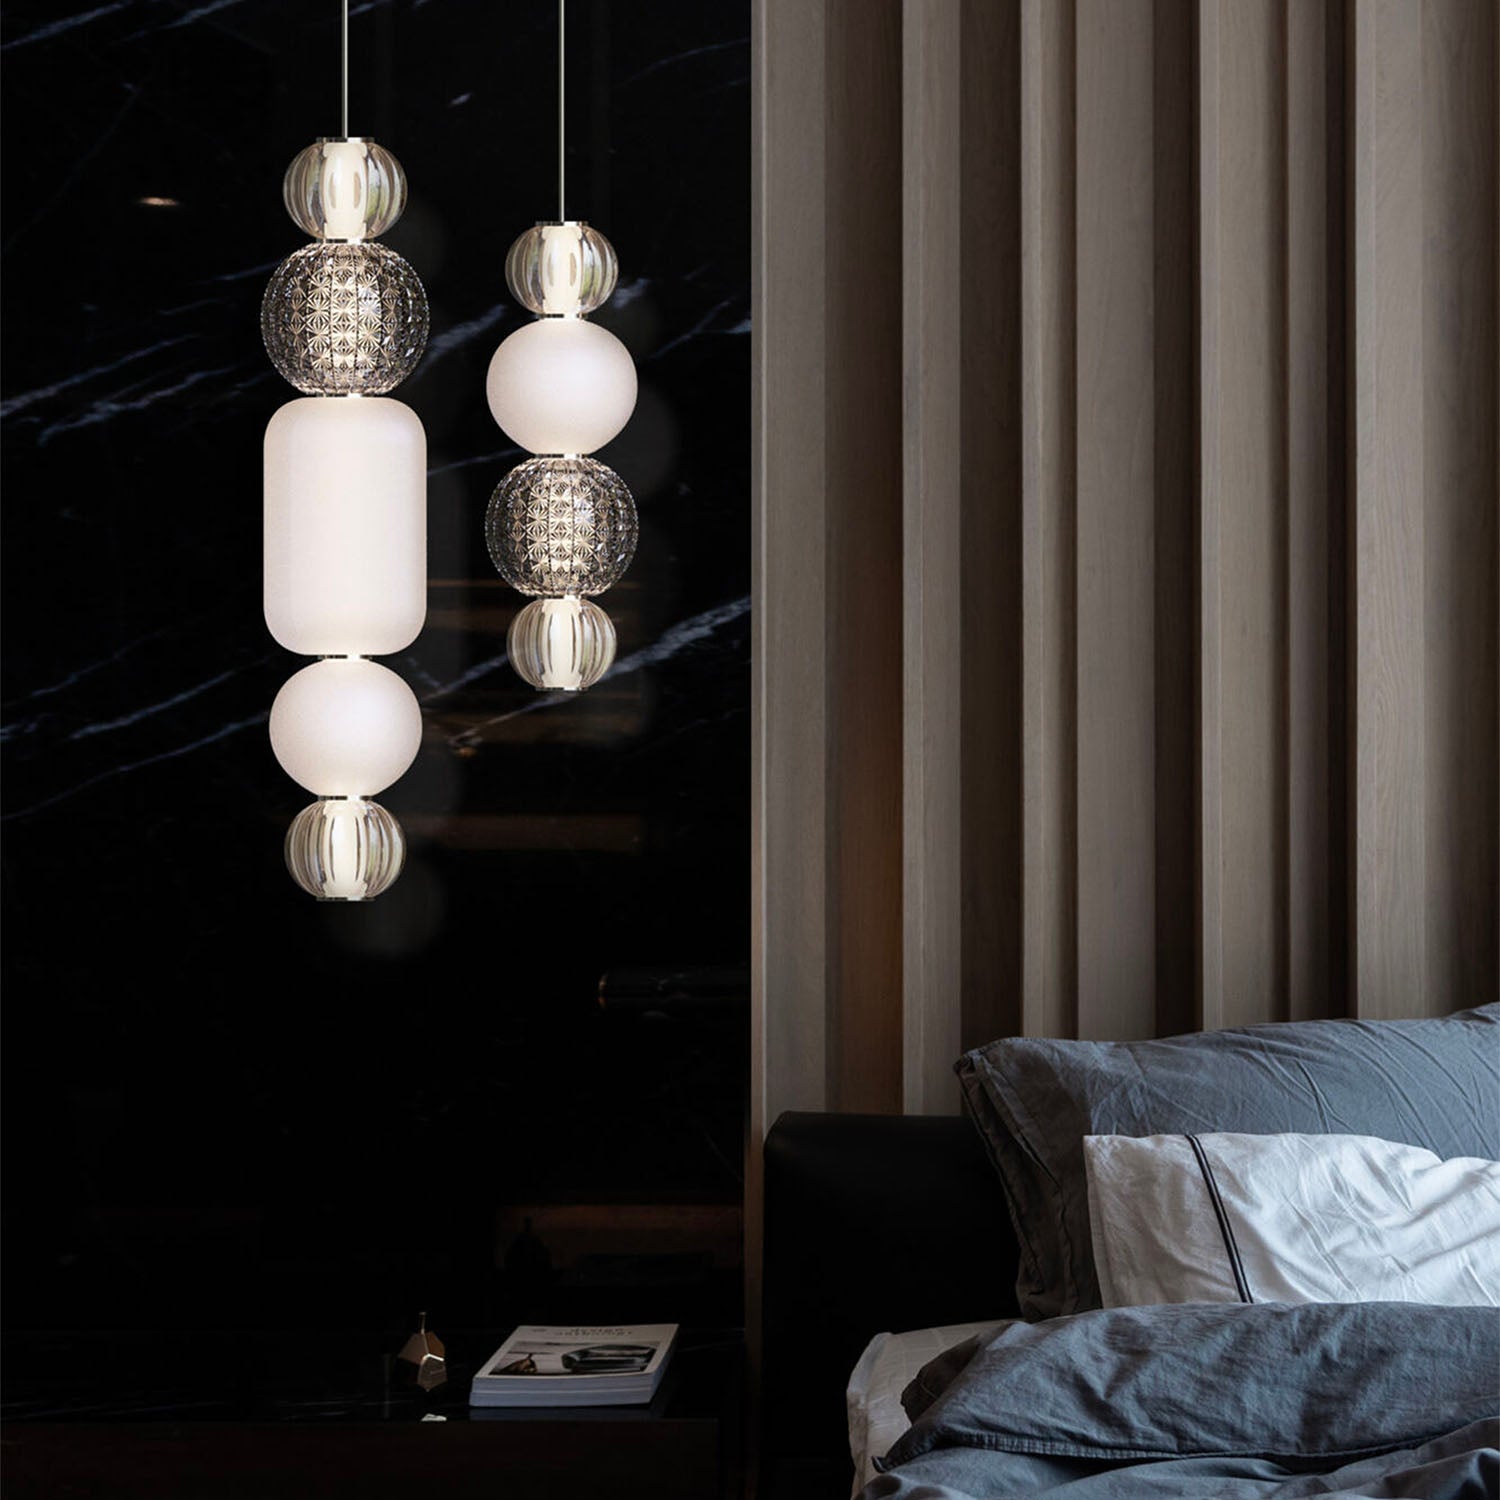 COLLAR - Vintage glass pendant light with integrated LED